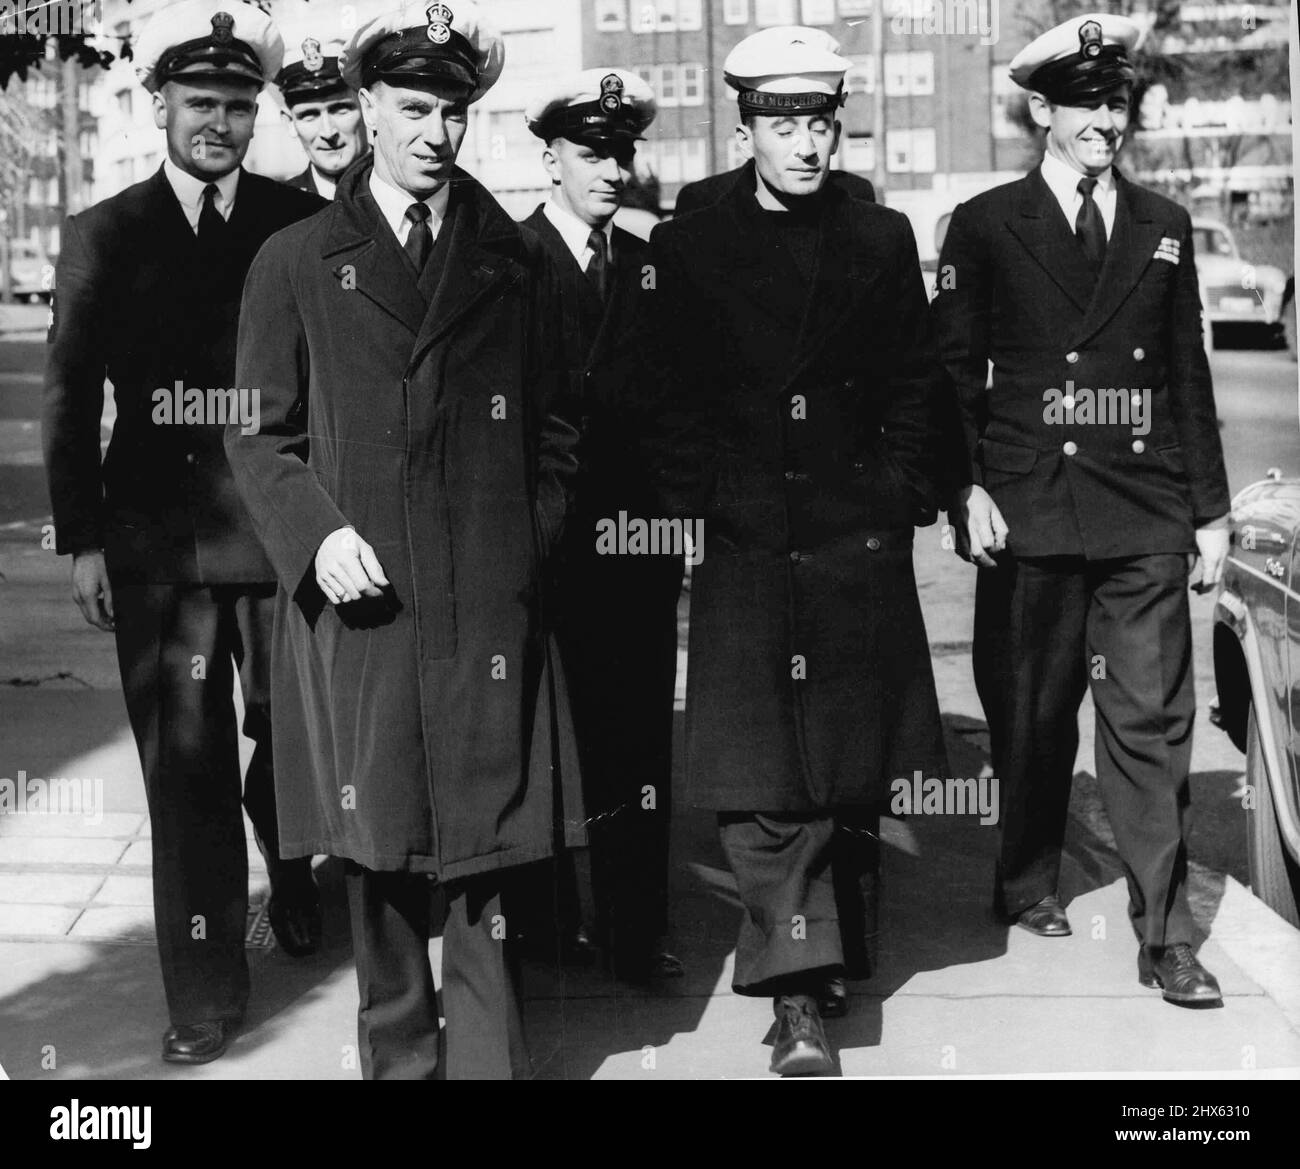 Navy courtmartial -- Some of the witnesses who have and have not yet appeared in the case, leave the navy H.Q. to go to lunch. L to R: L/S. R. Cocking, Chief M/E.R. Knowles, P.O. Steward E. Cox, P.O.M. (E) R. Sexton L/M (E) R. Ford and P.O.M. (E) J. Ward. June 30, 1955. (Photo by Wright/Fairfax Media). Stock Photo